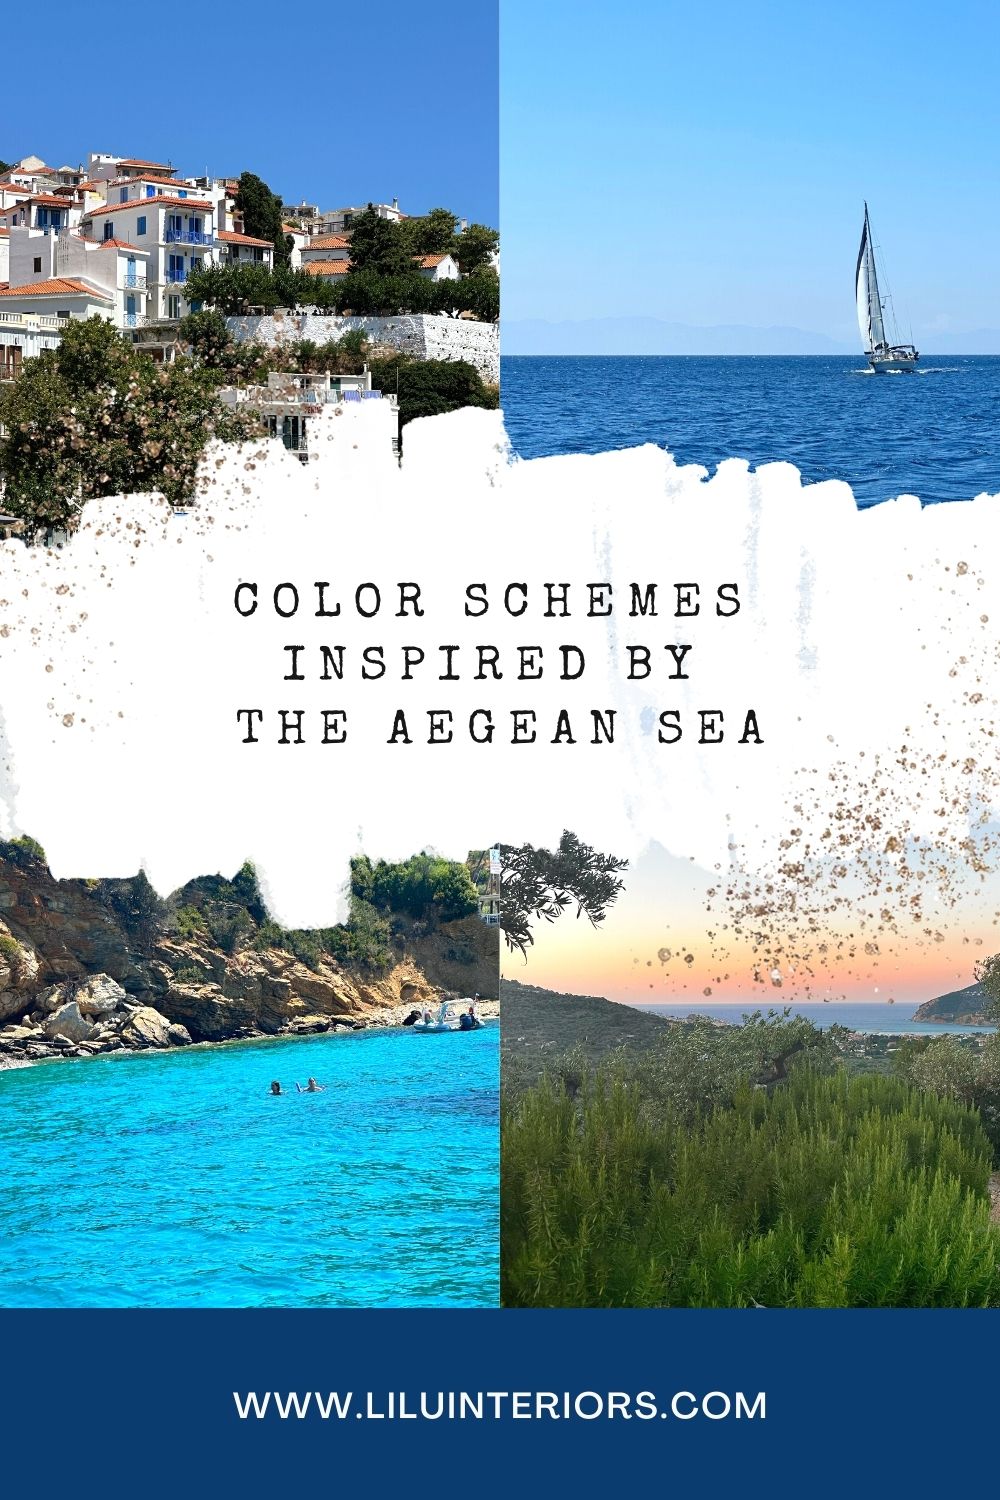 Color Schemes Inspired By The Aegean Sea: My Recent Trip To Greece And The Island Of Skopelos Inspired Me To Create Fresh Nature Inspired Color Palettes For Your Home. #colorpalette #colorscheme #natureinspired #homecolors #interiorcolors #interiordesign